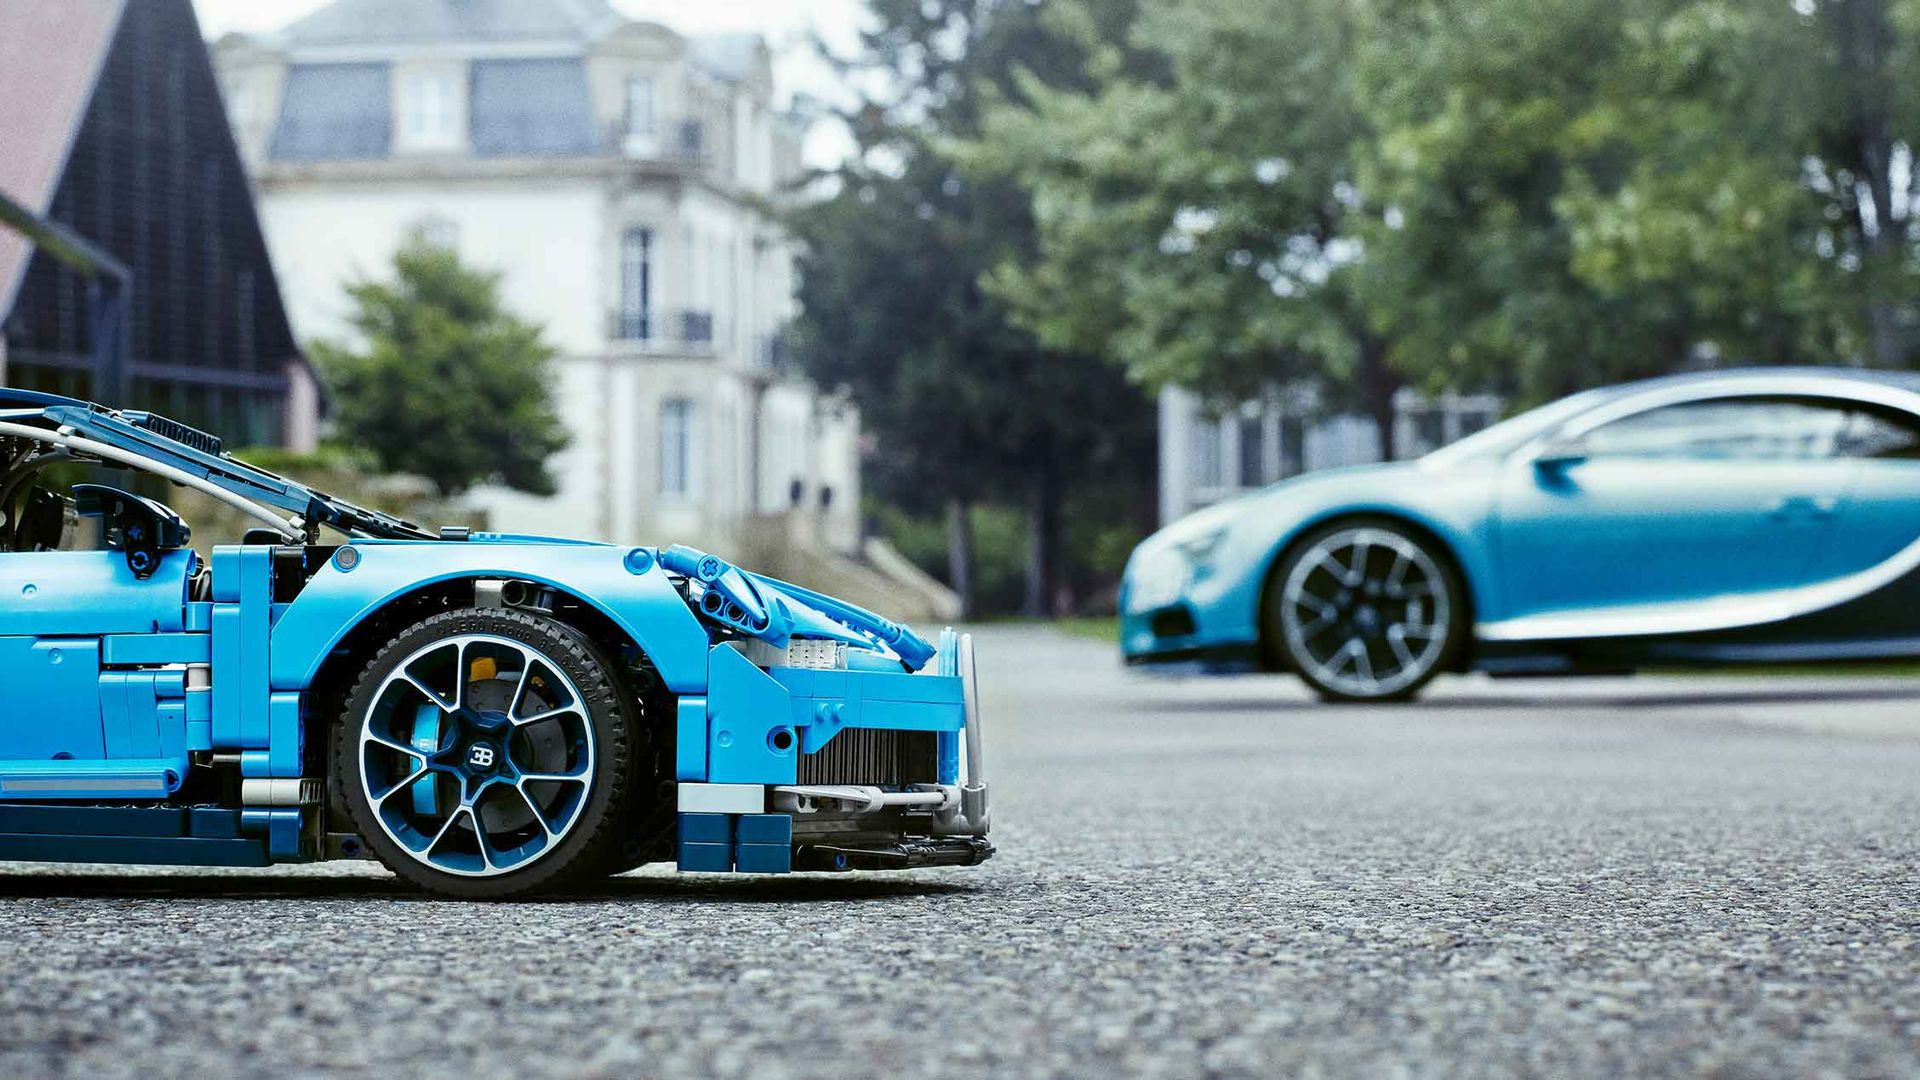 Lego Technic Bugatti Chiron — The Facts And Tiny Figures